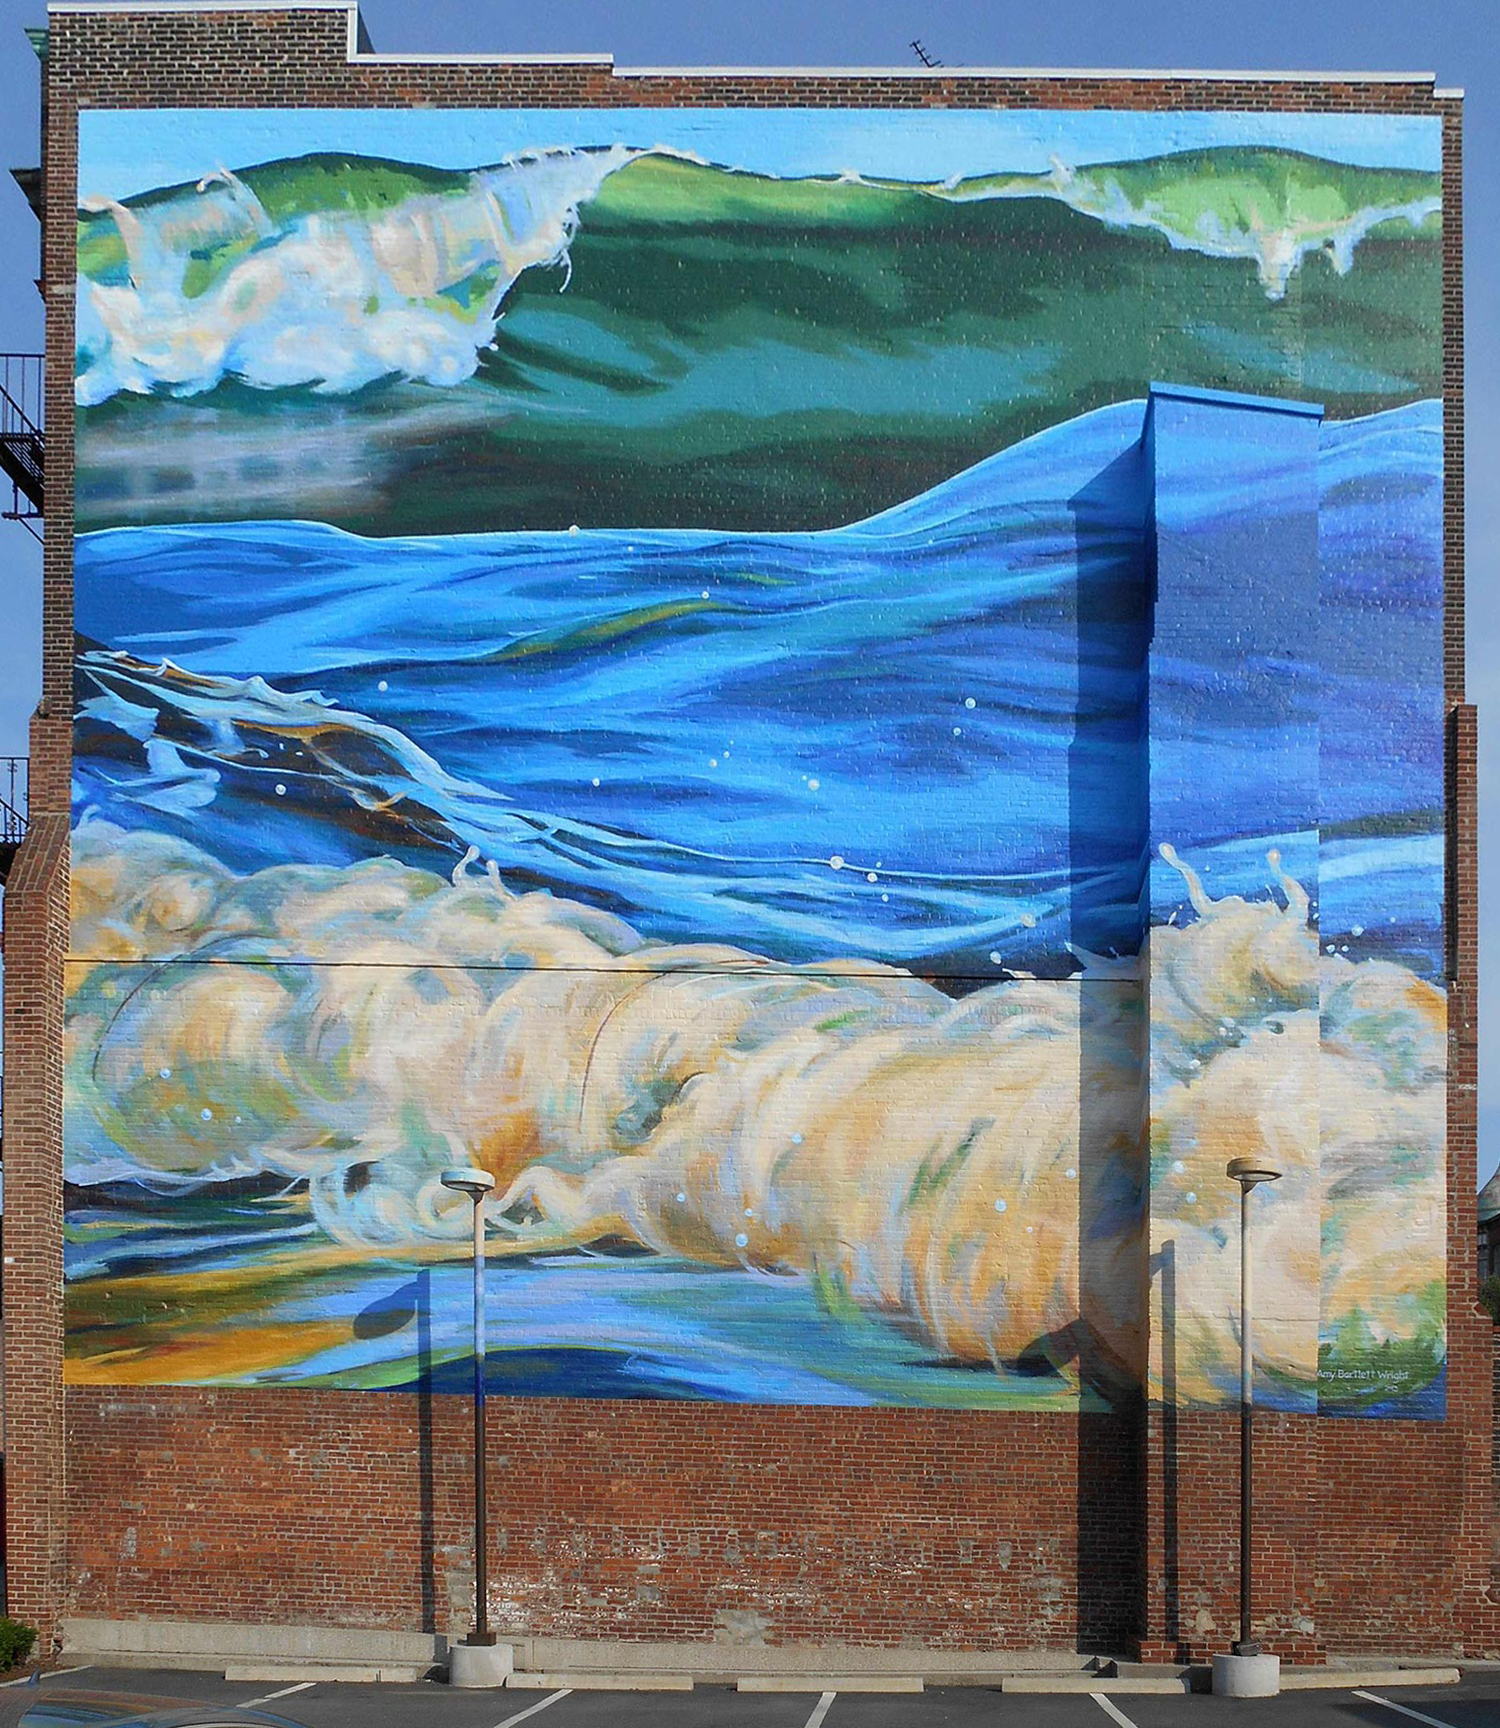 mural showing three ocean waves painted on a brick wall